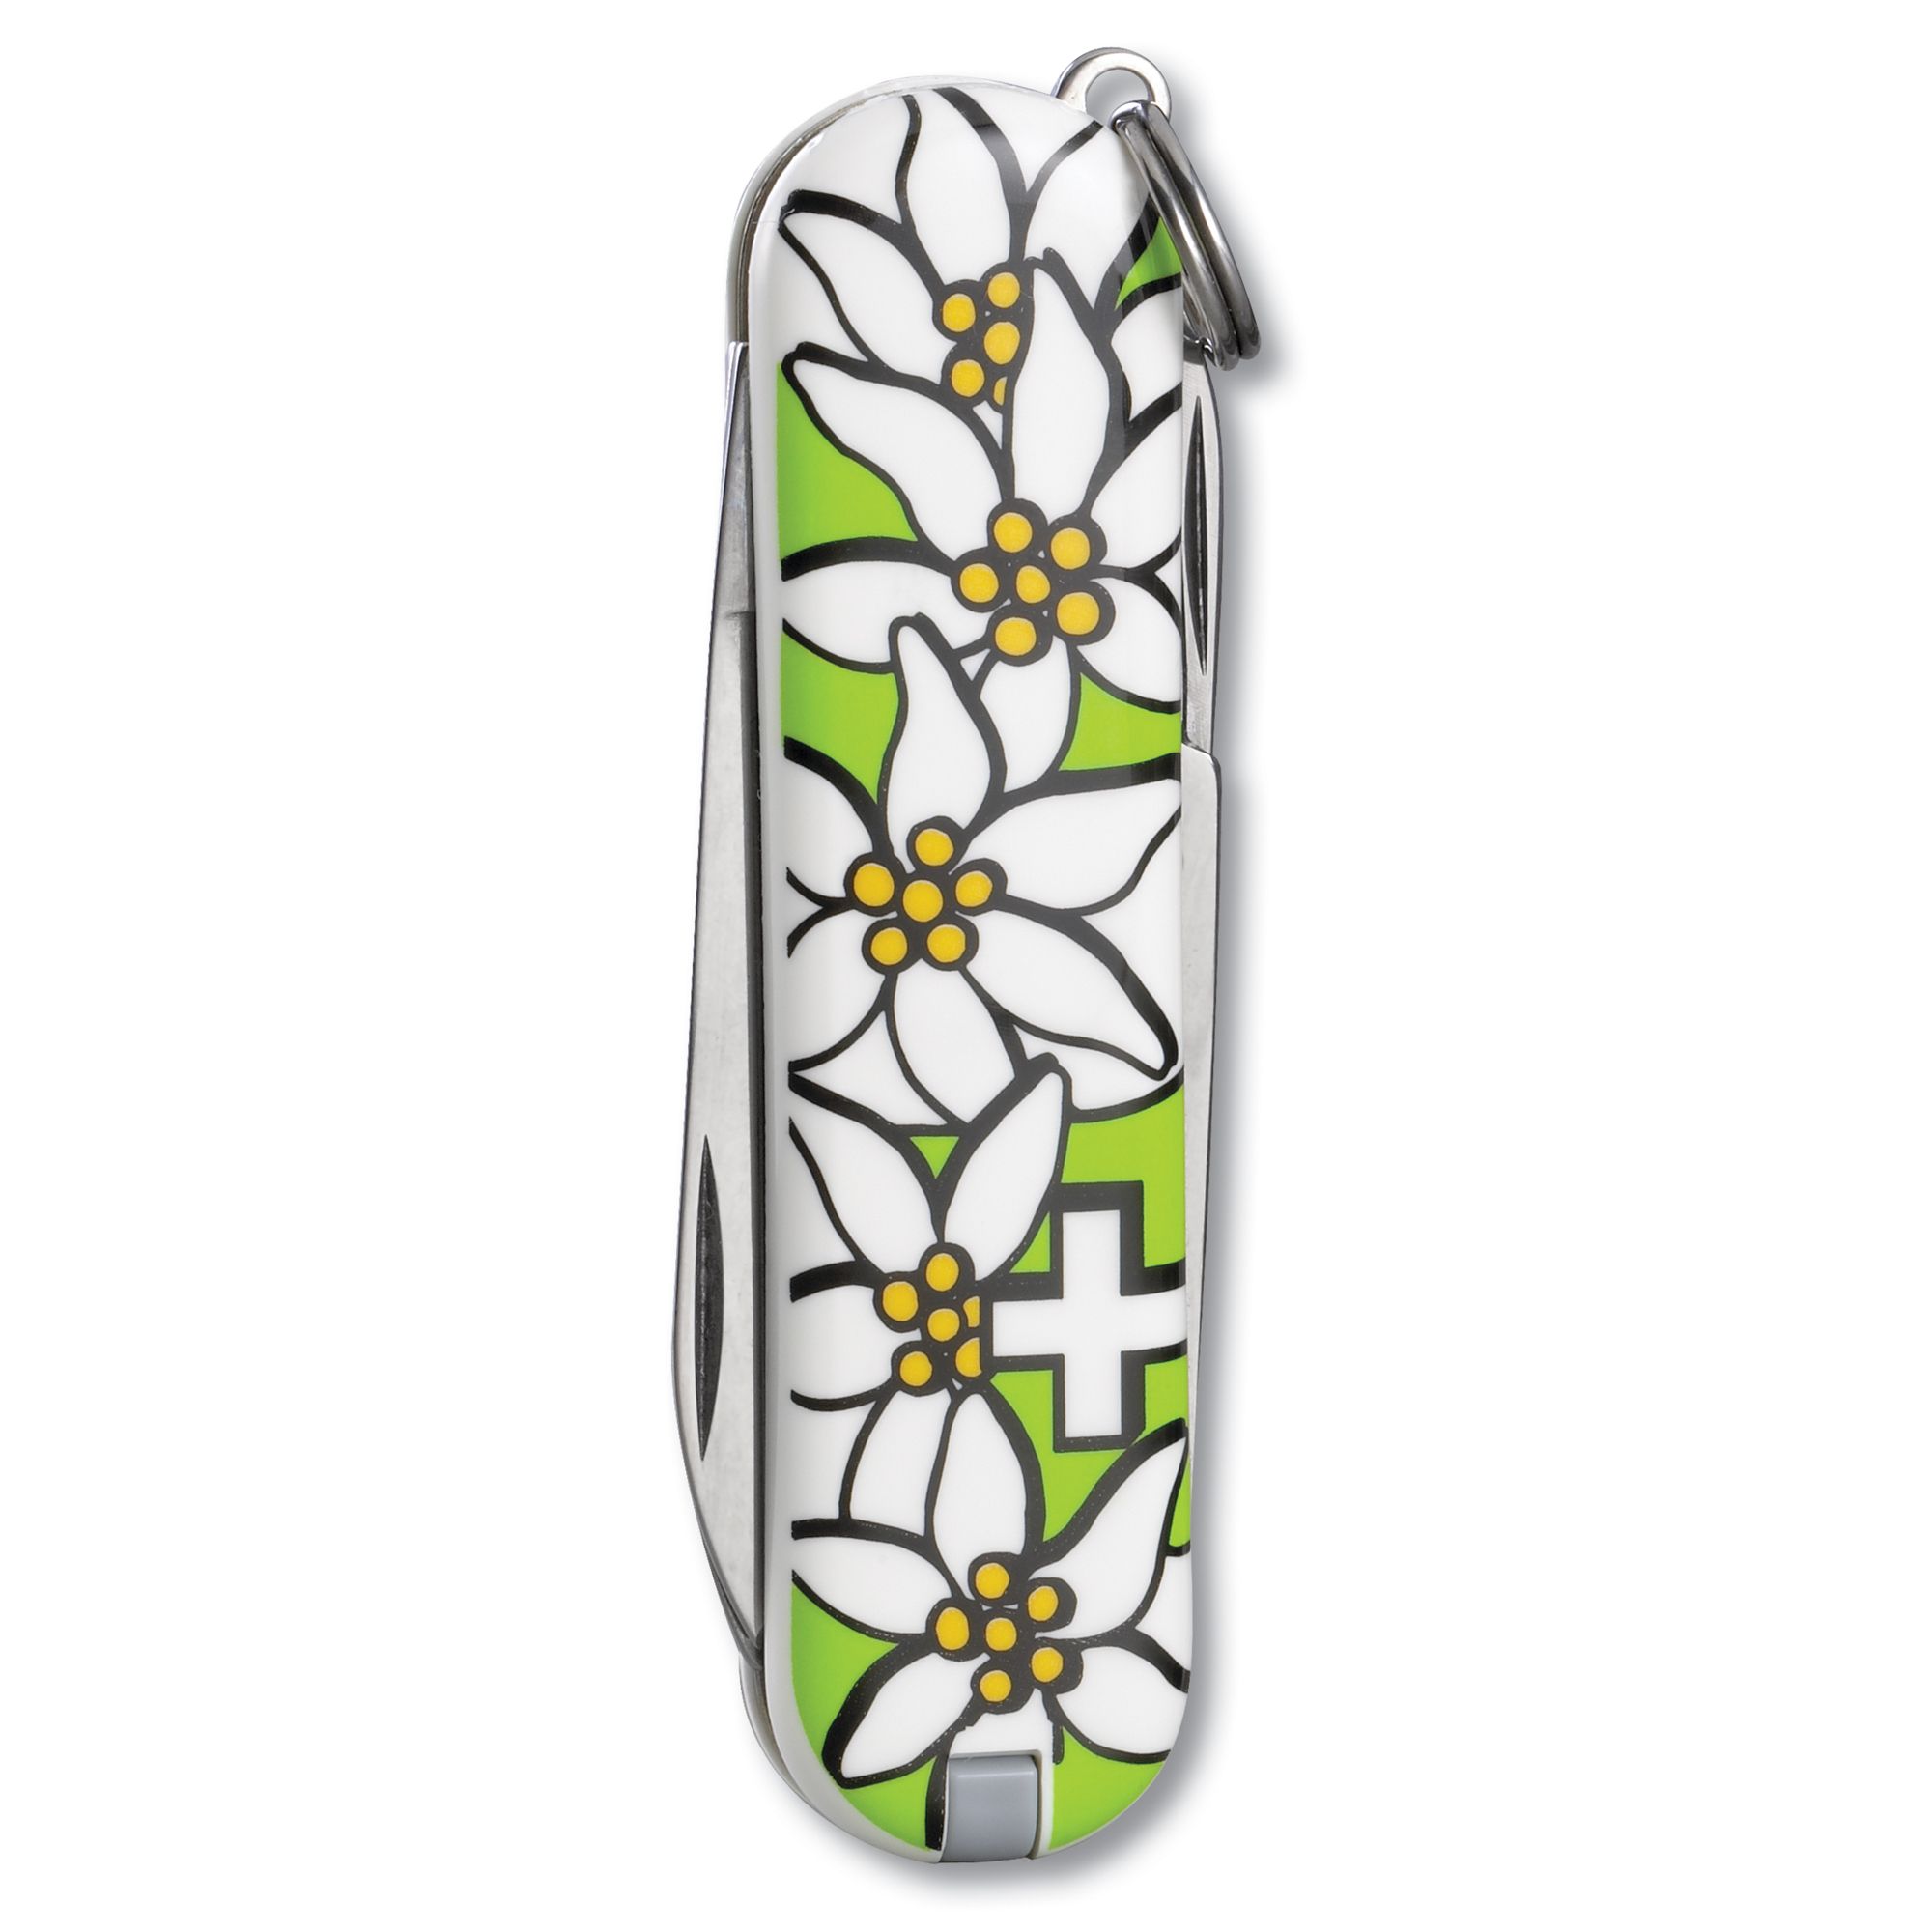 Victorinox Classic Edelweiss, Lime Green Swiss Army Knife